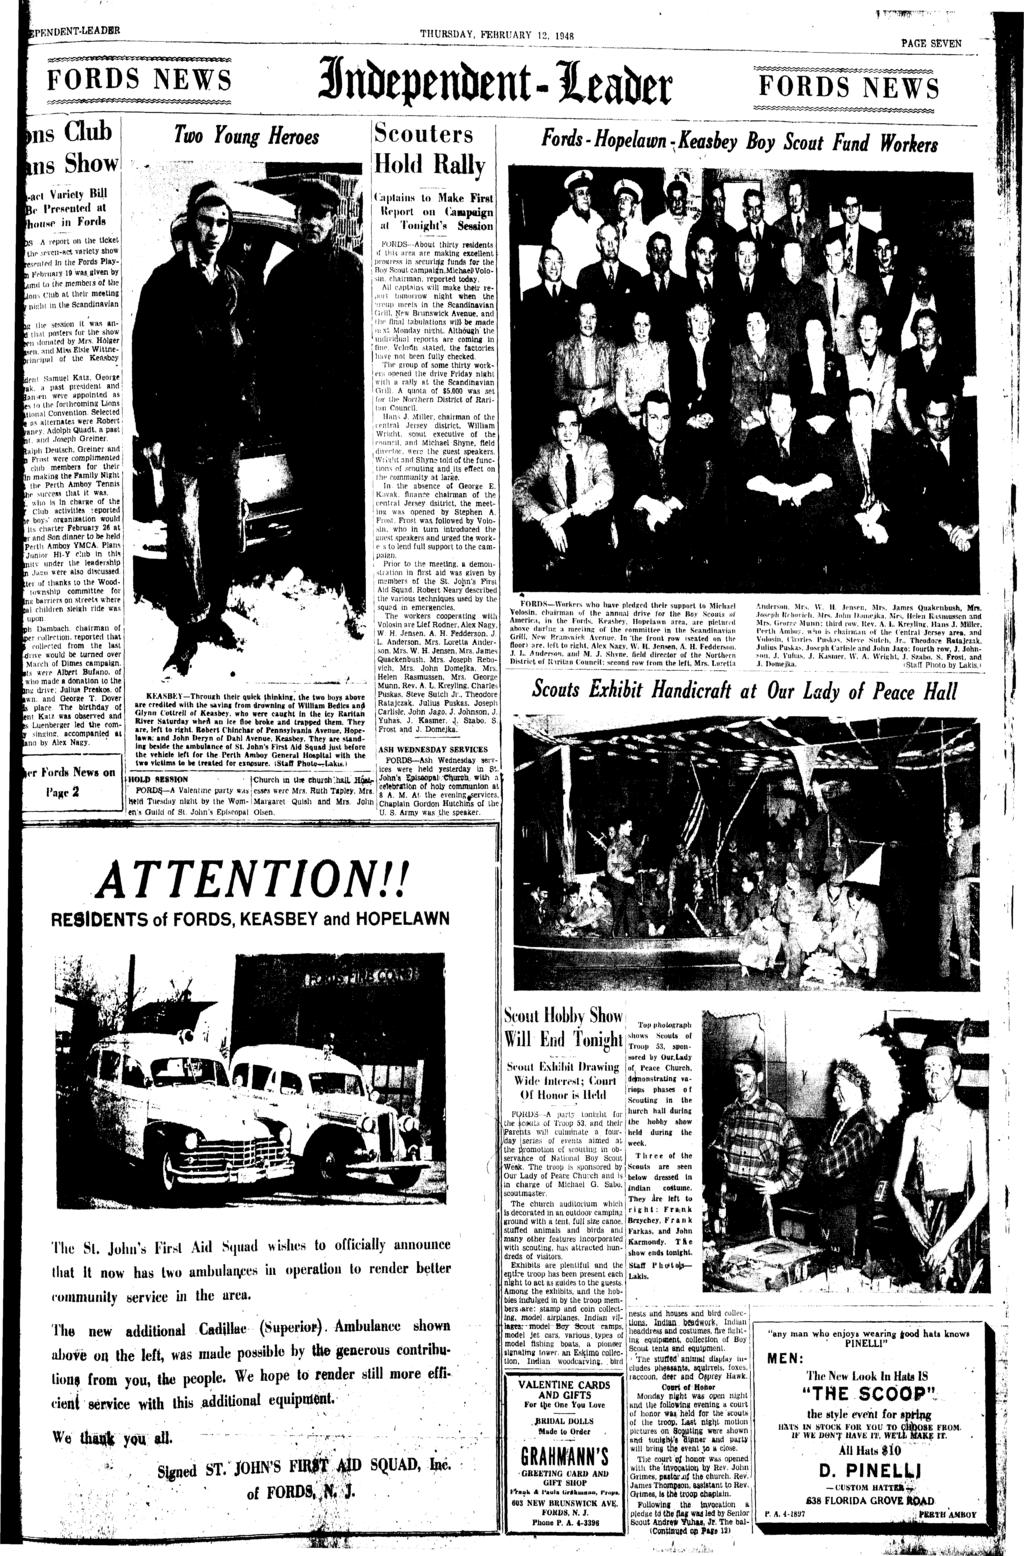 gpendent-leadbb THURSDAY, FEBRUARY 2, 98 PAGE FORDS NEWS Snbepentent-leater FORDS NEWS ms Gb ns Show.ad Varety Bll,> Presented at n Fords A report on the tcket -.